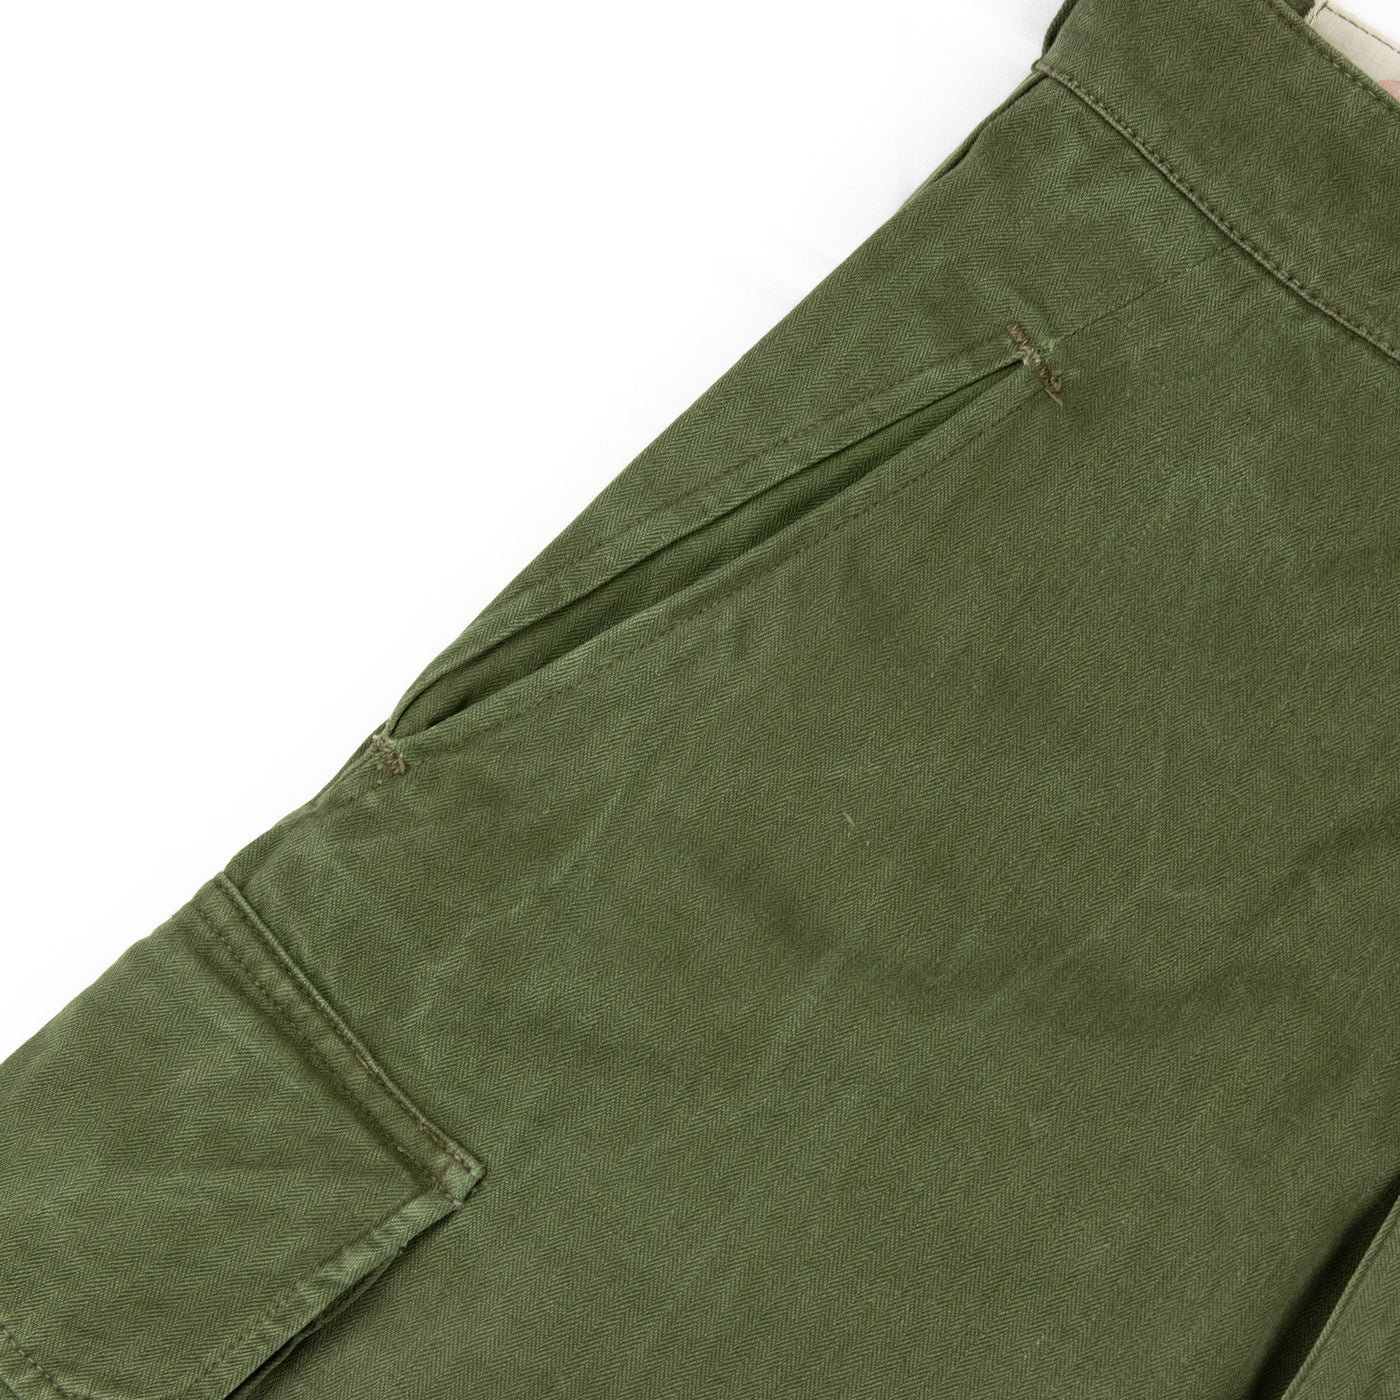 Vintage 1950s French Army M47 HBT Military Cargo Trousers - 29